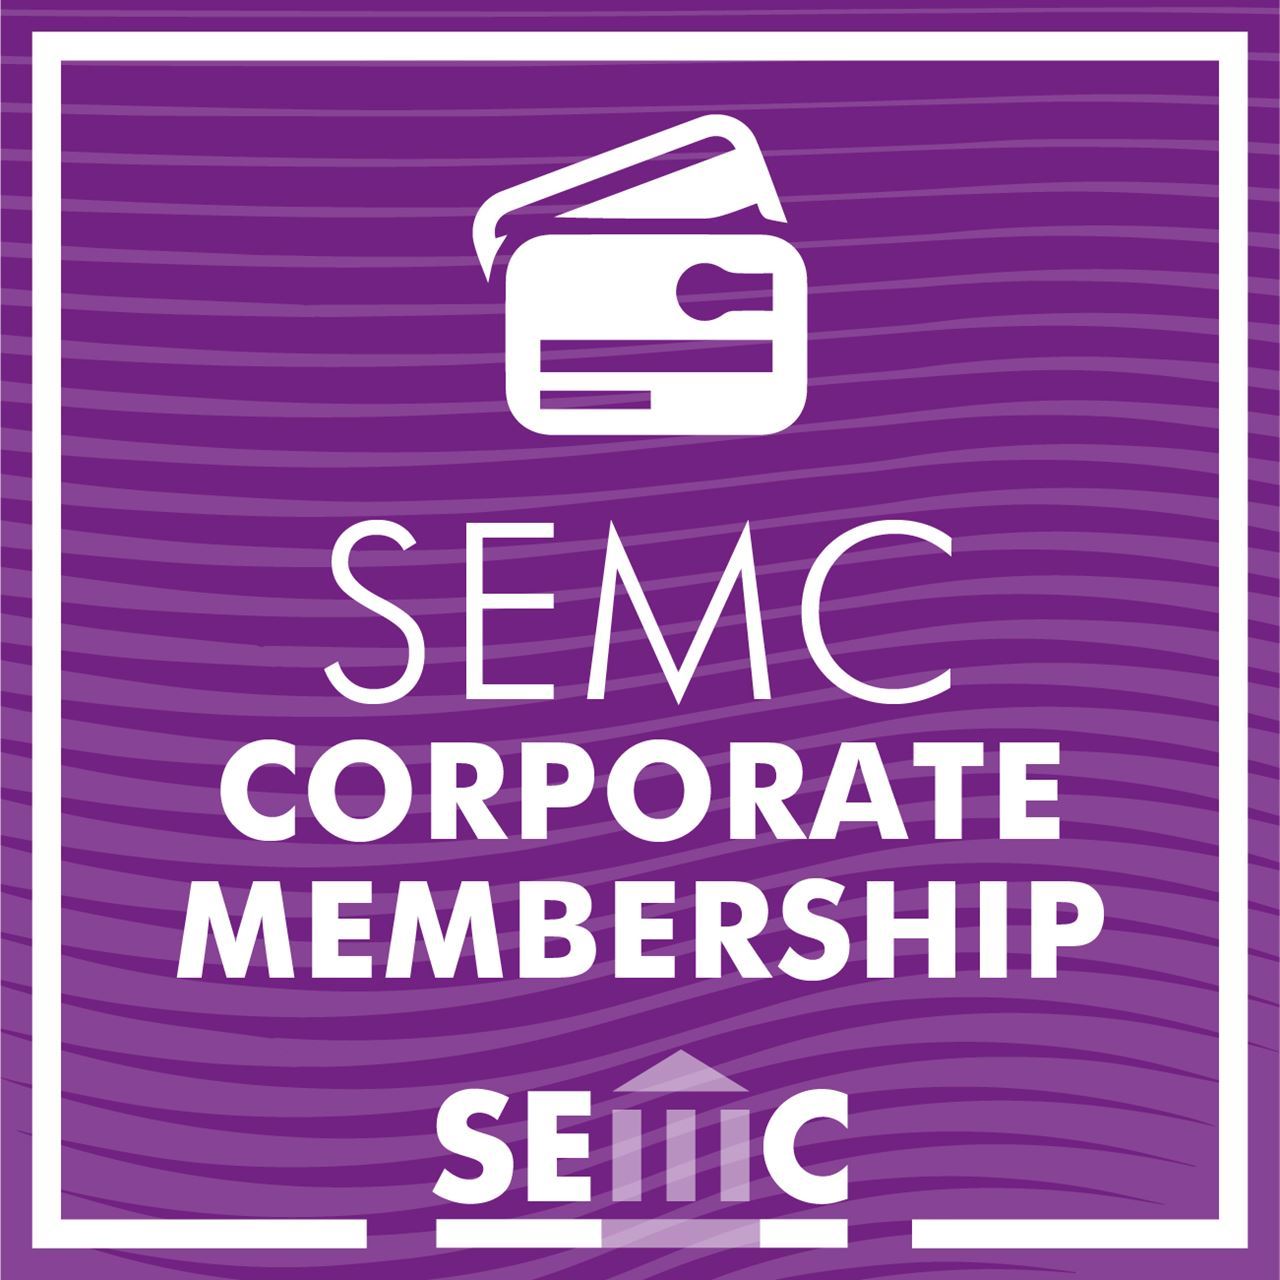 A purple striped background, with a graphic of cards and the words “SEMC Corporate Membership” centered. The SEMC logo is also at the bottom. 